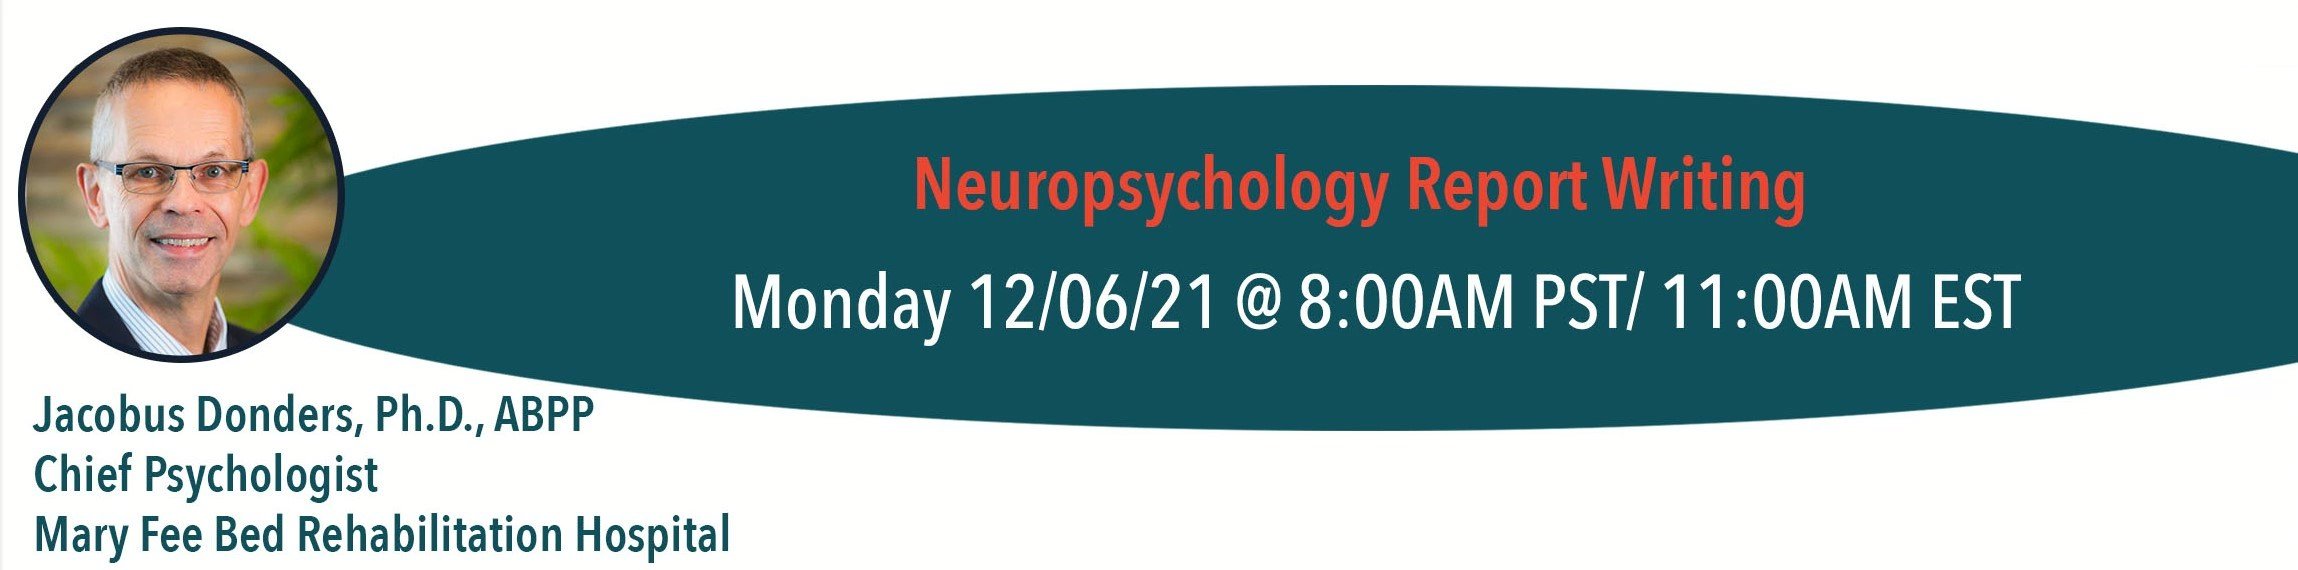 Neuropsychology Report Writing with Dr. Jacobus Donders